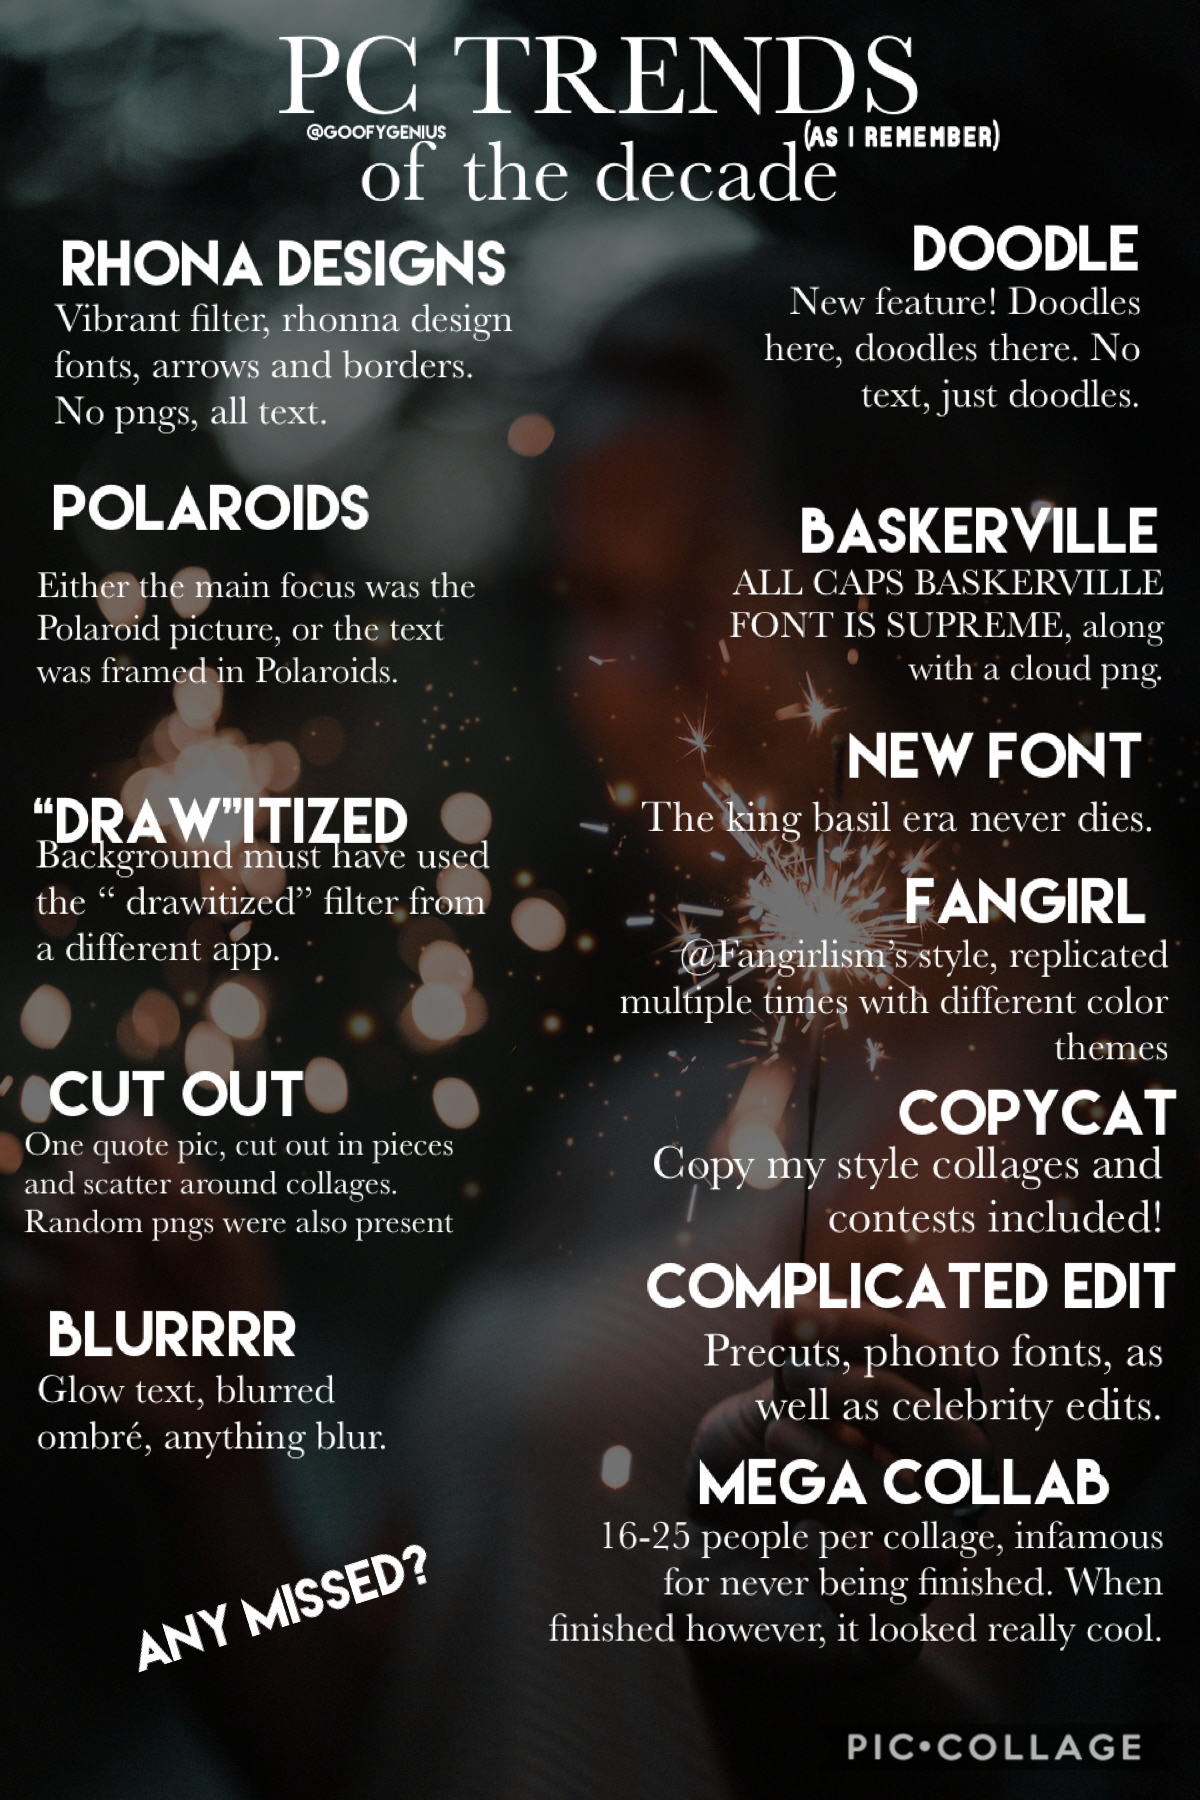 Did I miss any? Which trend was your favorite? I’d have to say mine was the “Blurrr” Trend. 